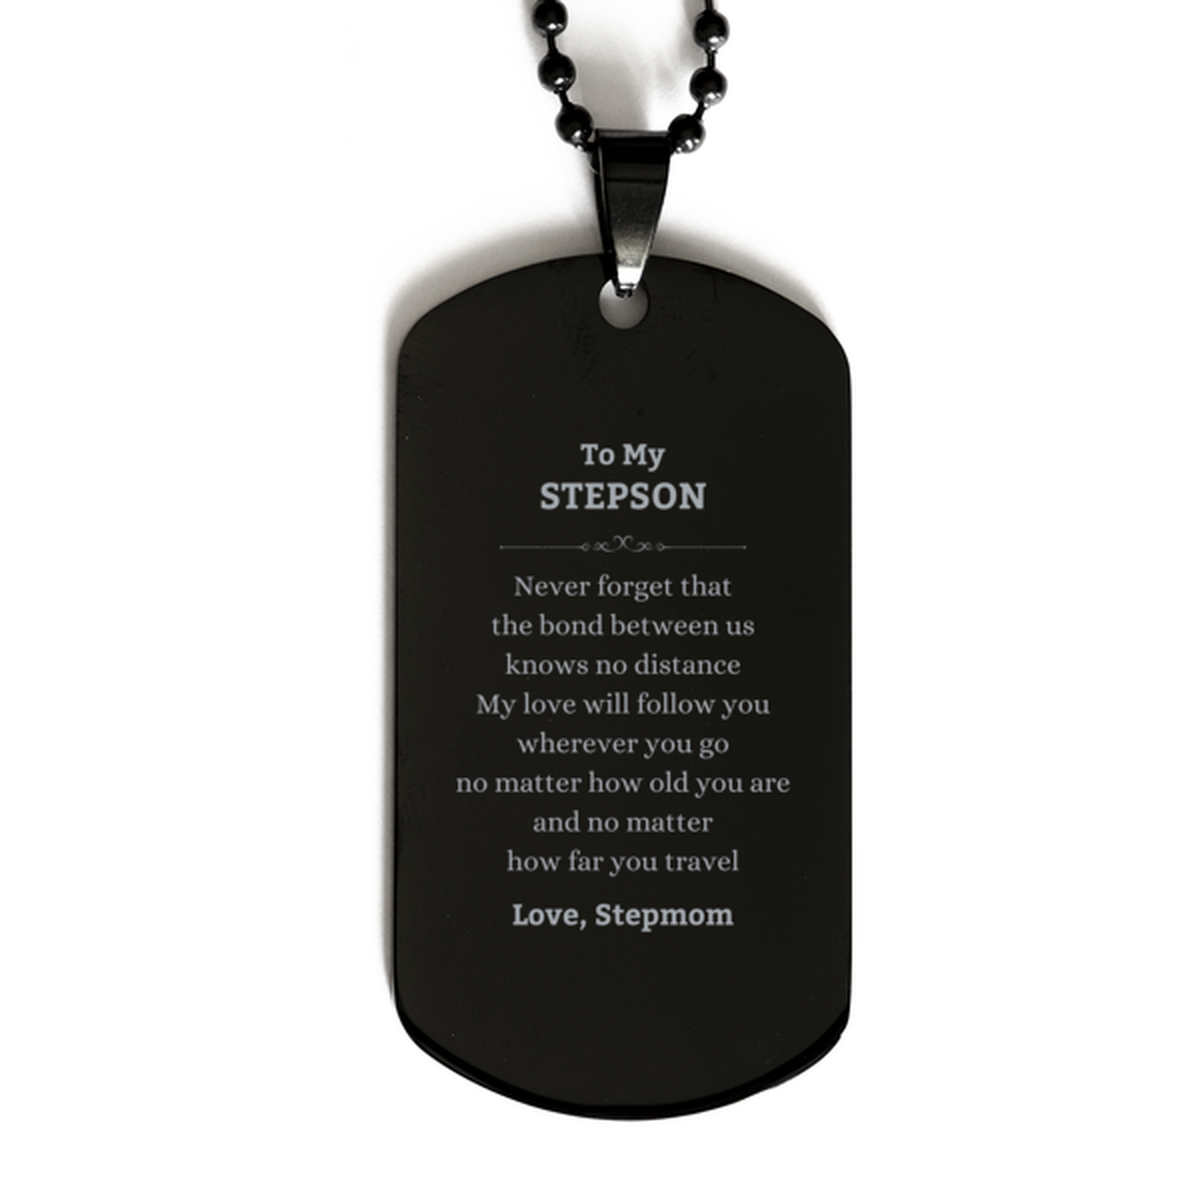 Stepson Birthday Gifts from Stepmom, Adjustable Black Dog Tag for Stepson Christmas Graduation Unique Gifts Stepson Never forget that the bond between us knows no distance. Love, Stepmom